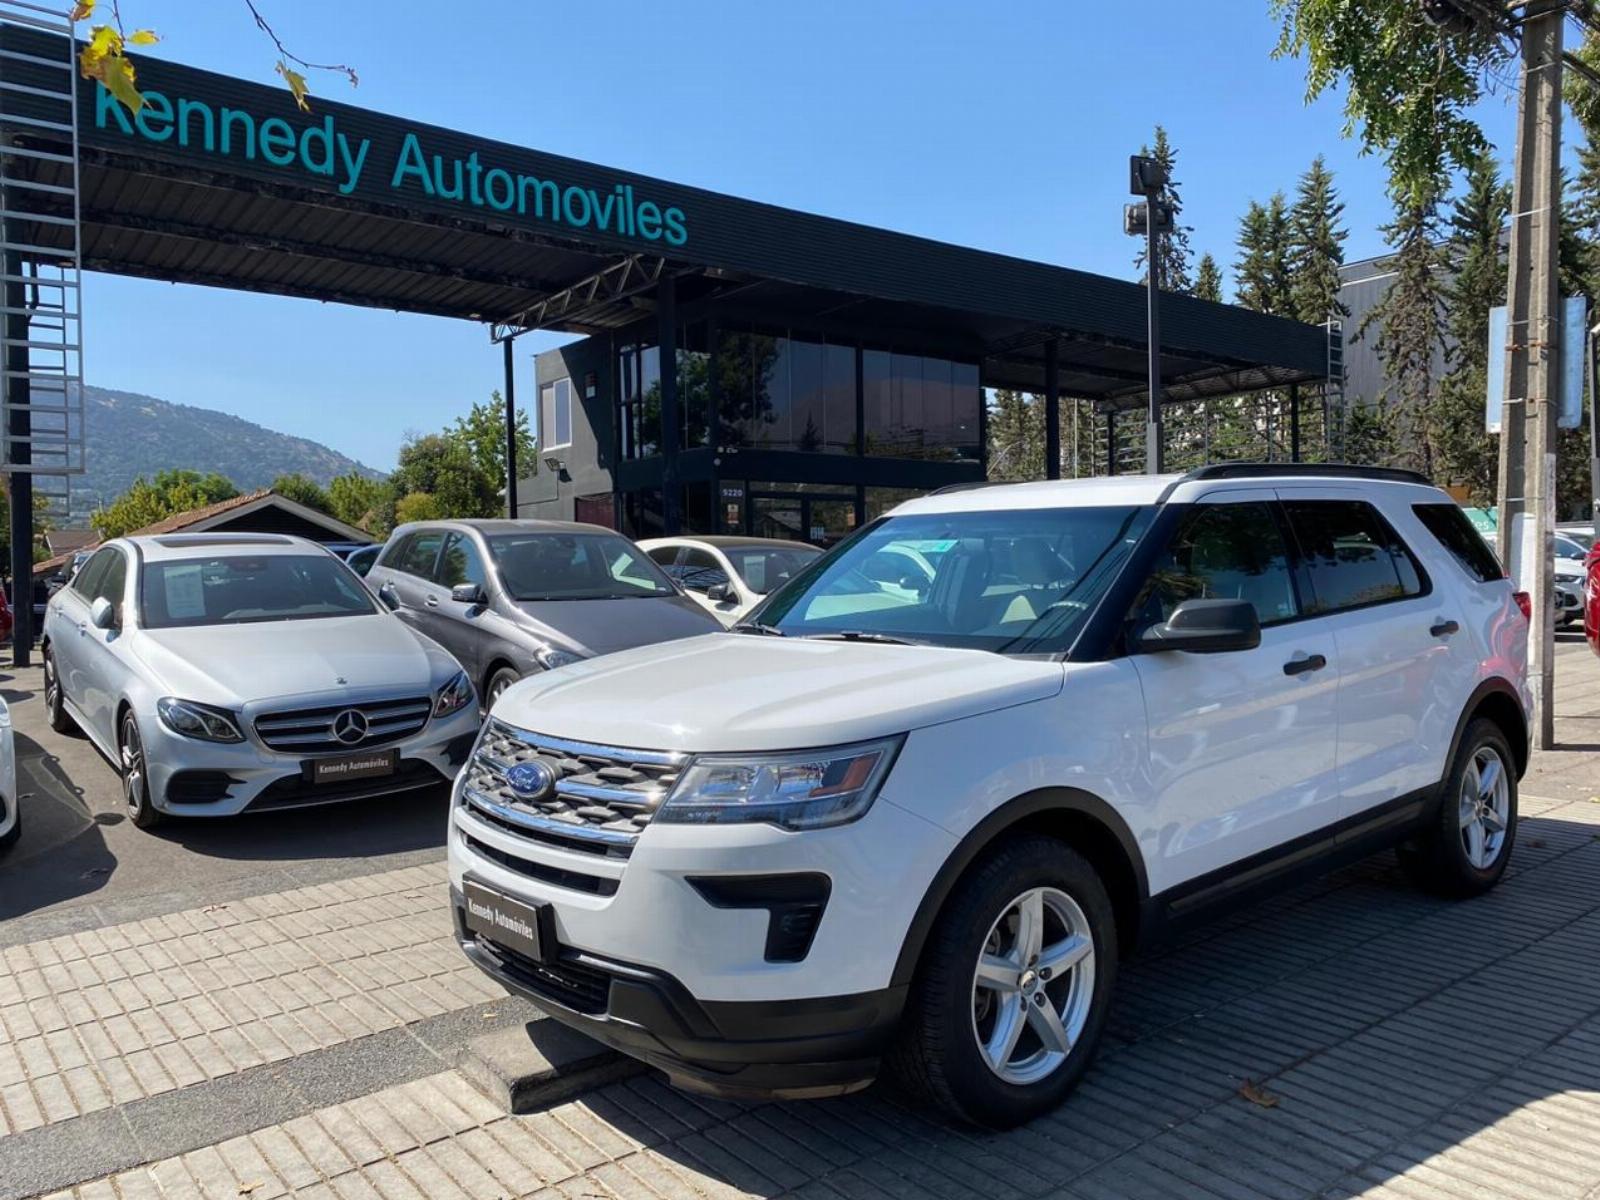 FORD EXPLORER 2.3 Ecoboost Auto 2019 Impecable - FULL MOTOR